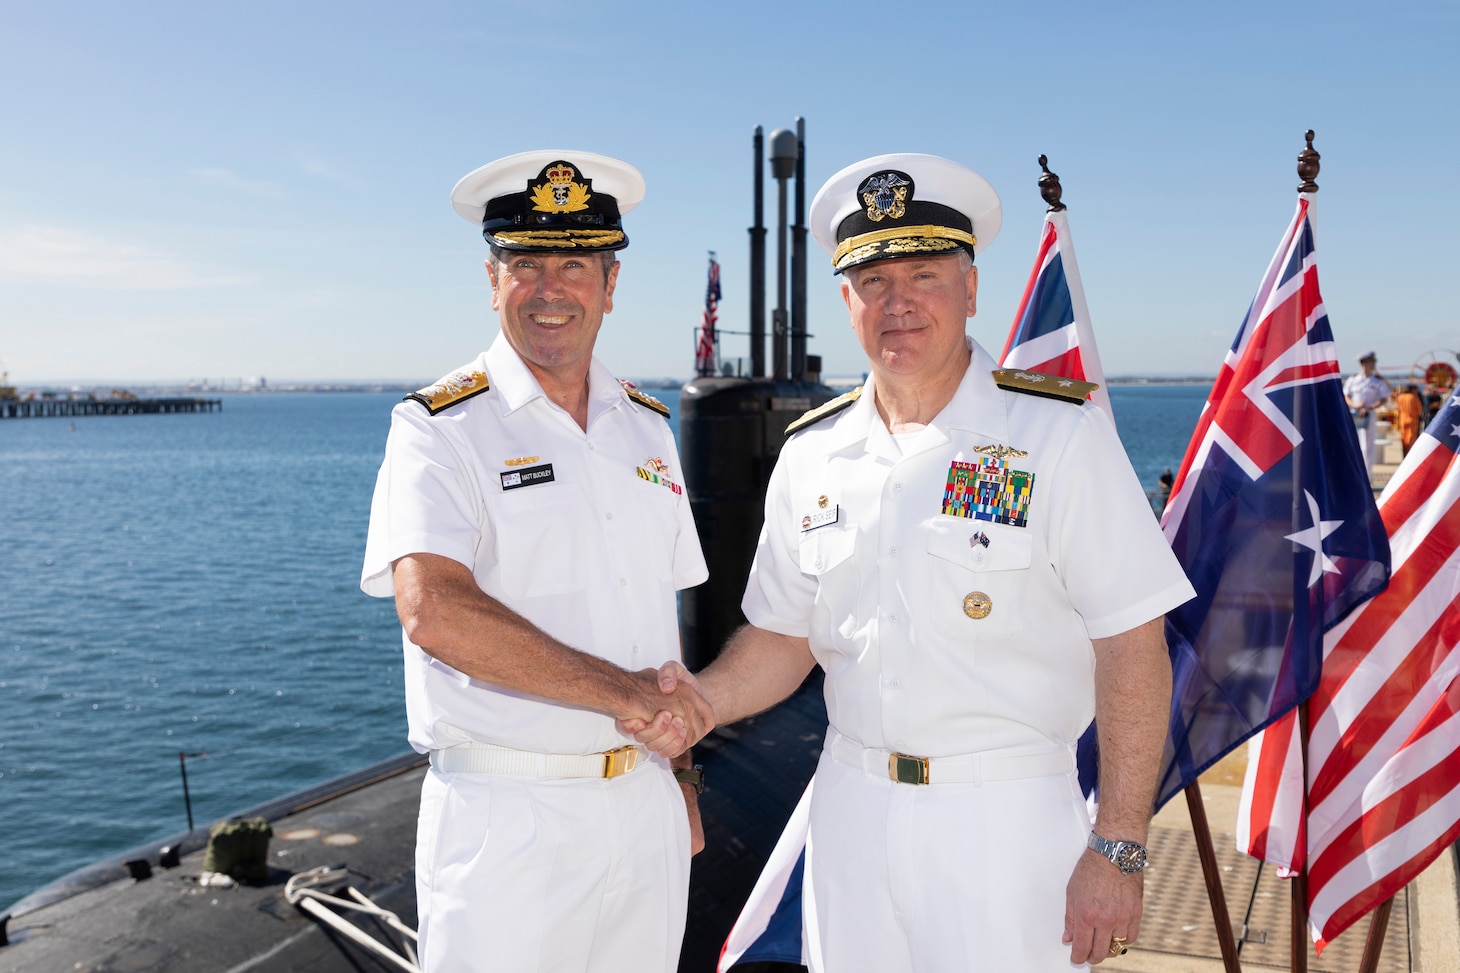 Royal Australian Navy Rear Adm. Matt Buckley, Head of Capability, Nuclear Powered Submarine Task Force and Rear Adm. Rick Seif, commander, Submarine Group 7 pose for a photo before a tour of the Los Angeles-class fast-attack submarine USS Asheville (SSN 758) with Australian political leaders, March 14. Asheville conducted multiple tours for distinguished visitors during a routine port visit to HMAS Stirling, Western Australia to enhance interoperability and communication, and strengthen relationships with the Royal Australian Navy.